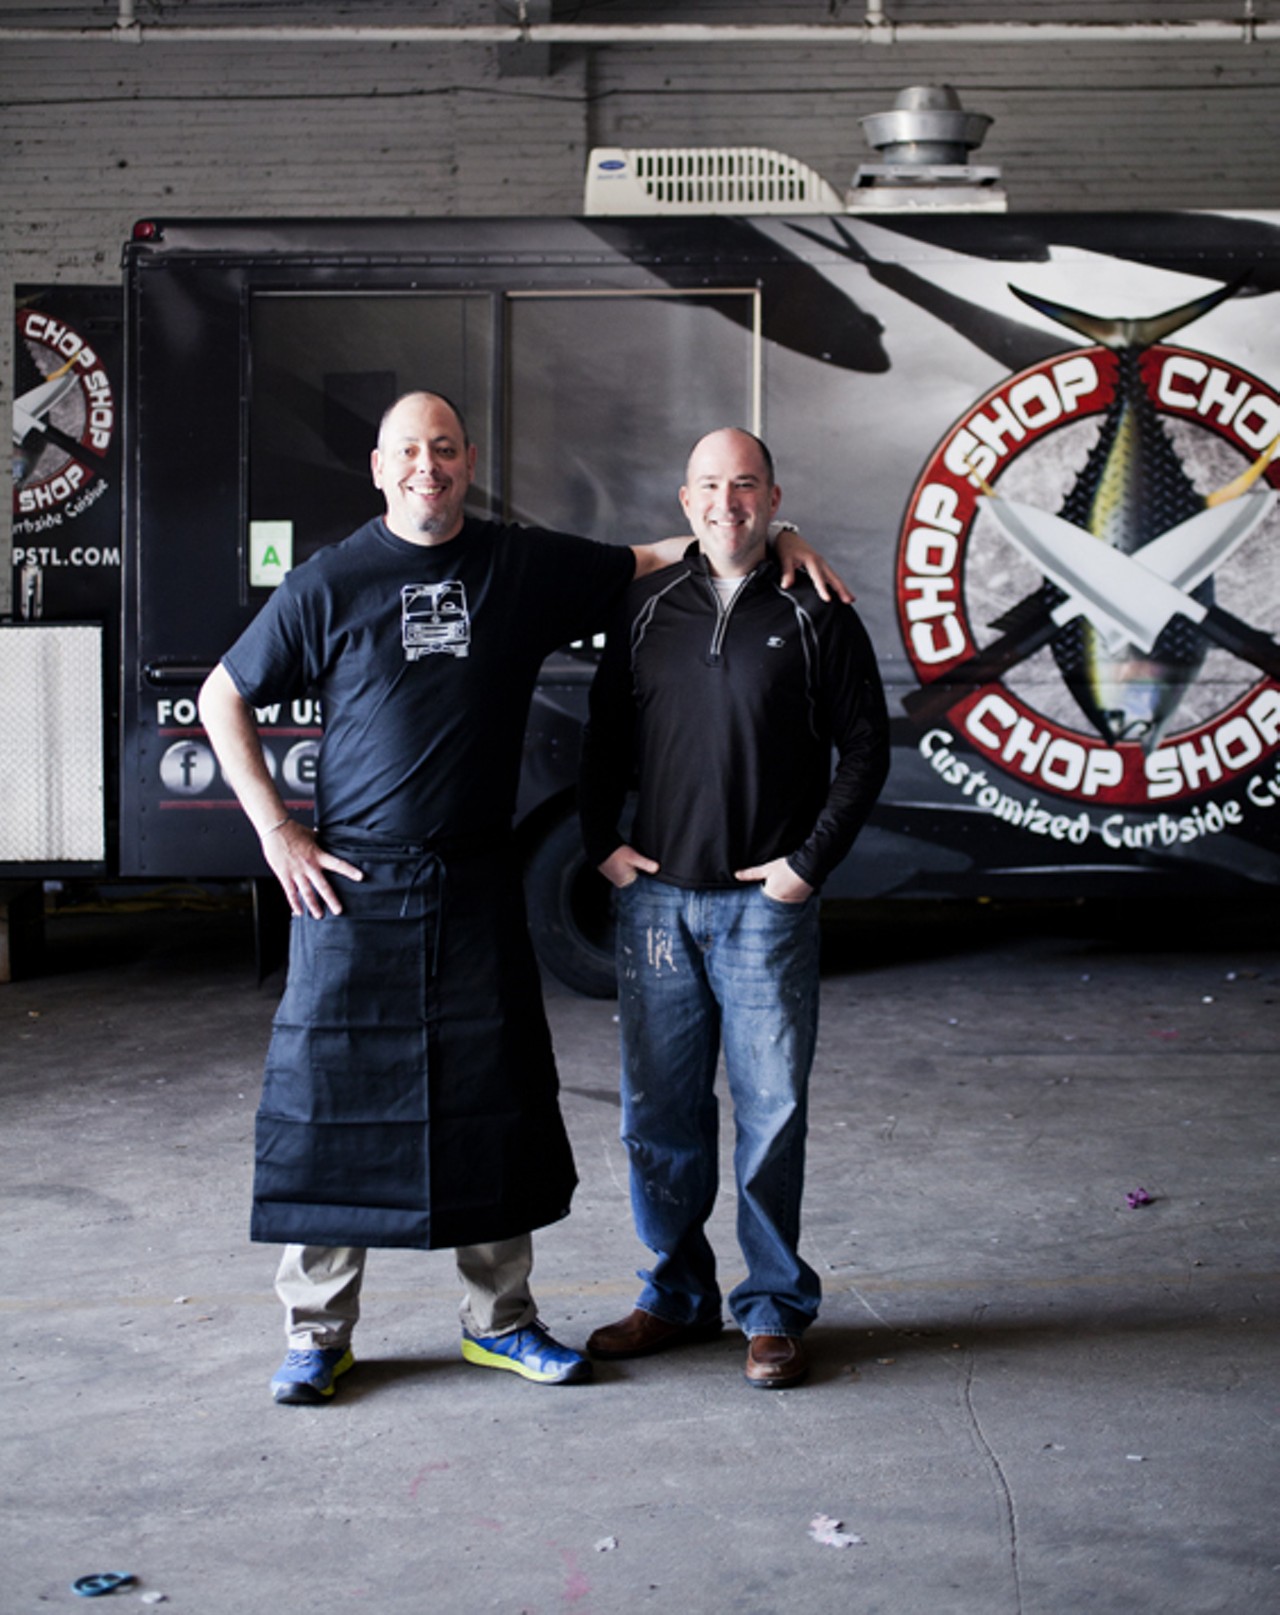 Chef/owner Eliott Harris and marketing/ad/PR guru Bryce Woollen run the entire operation together. When the truck is out serving sushi to the masses... it's the two of them... making it all happen.